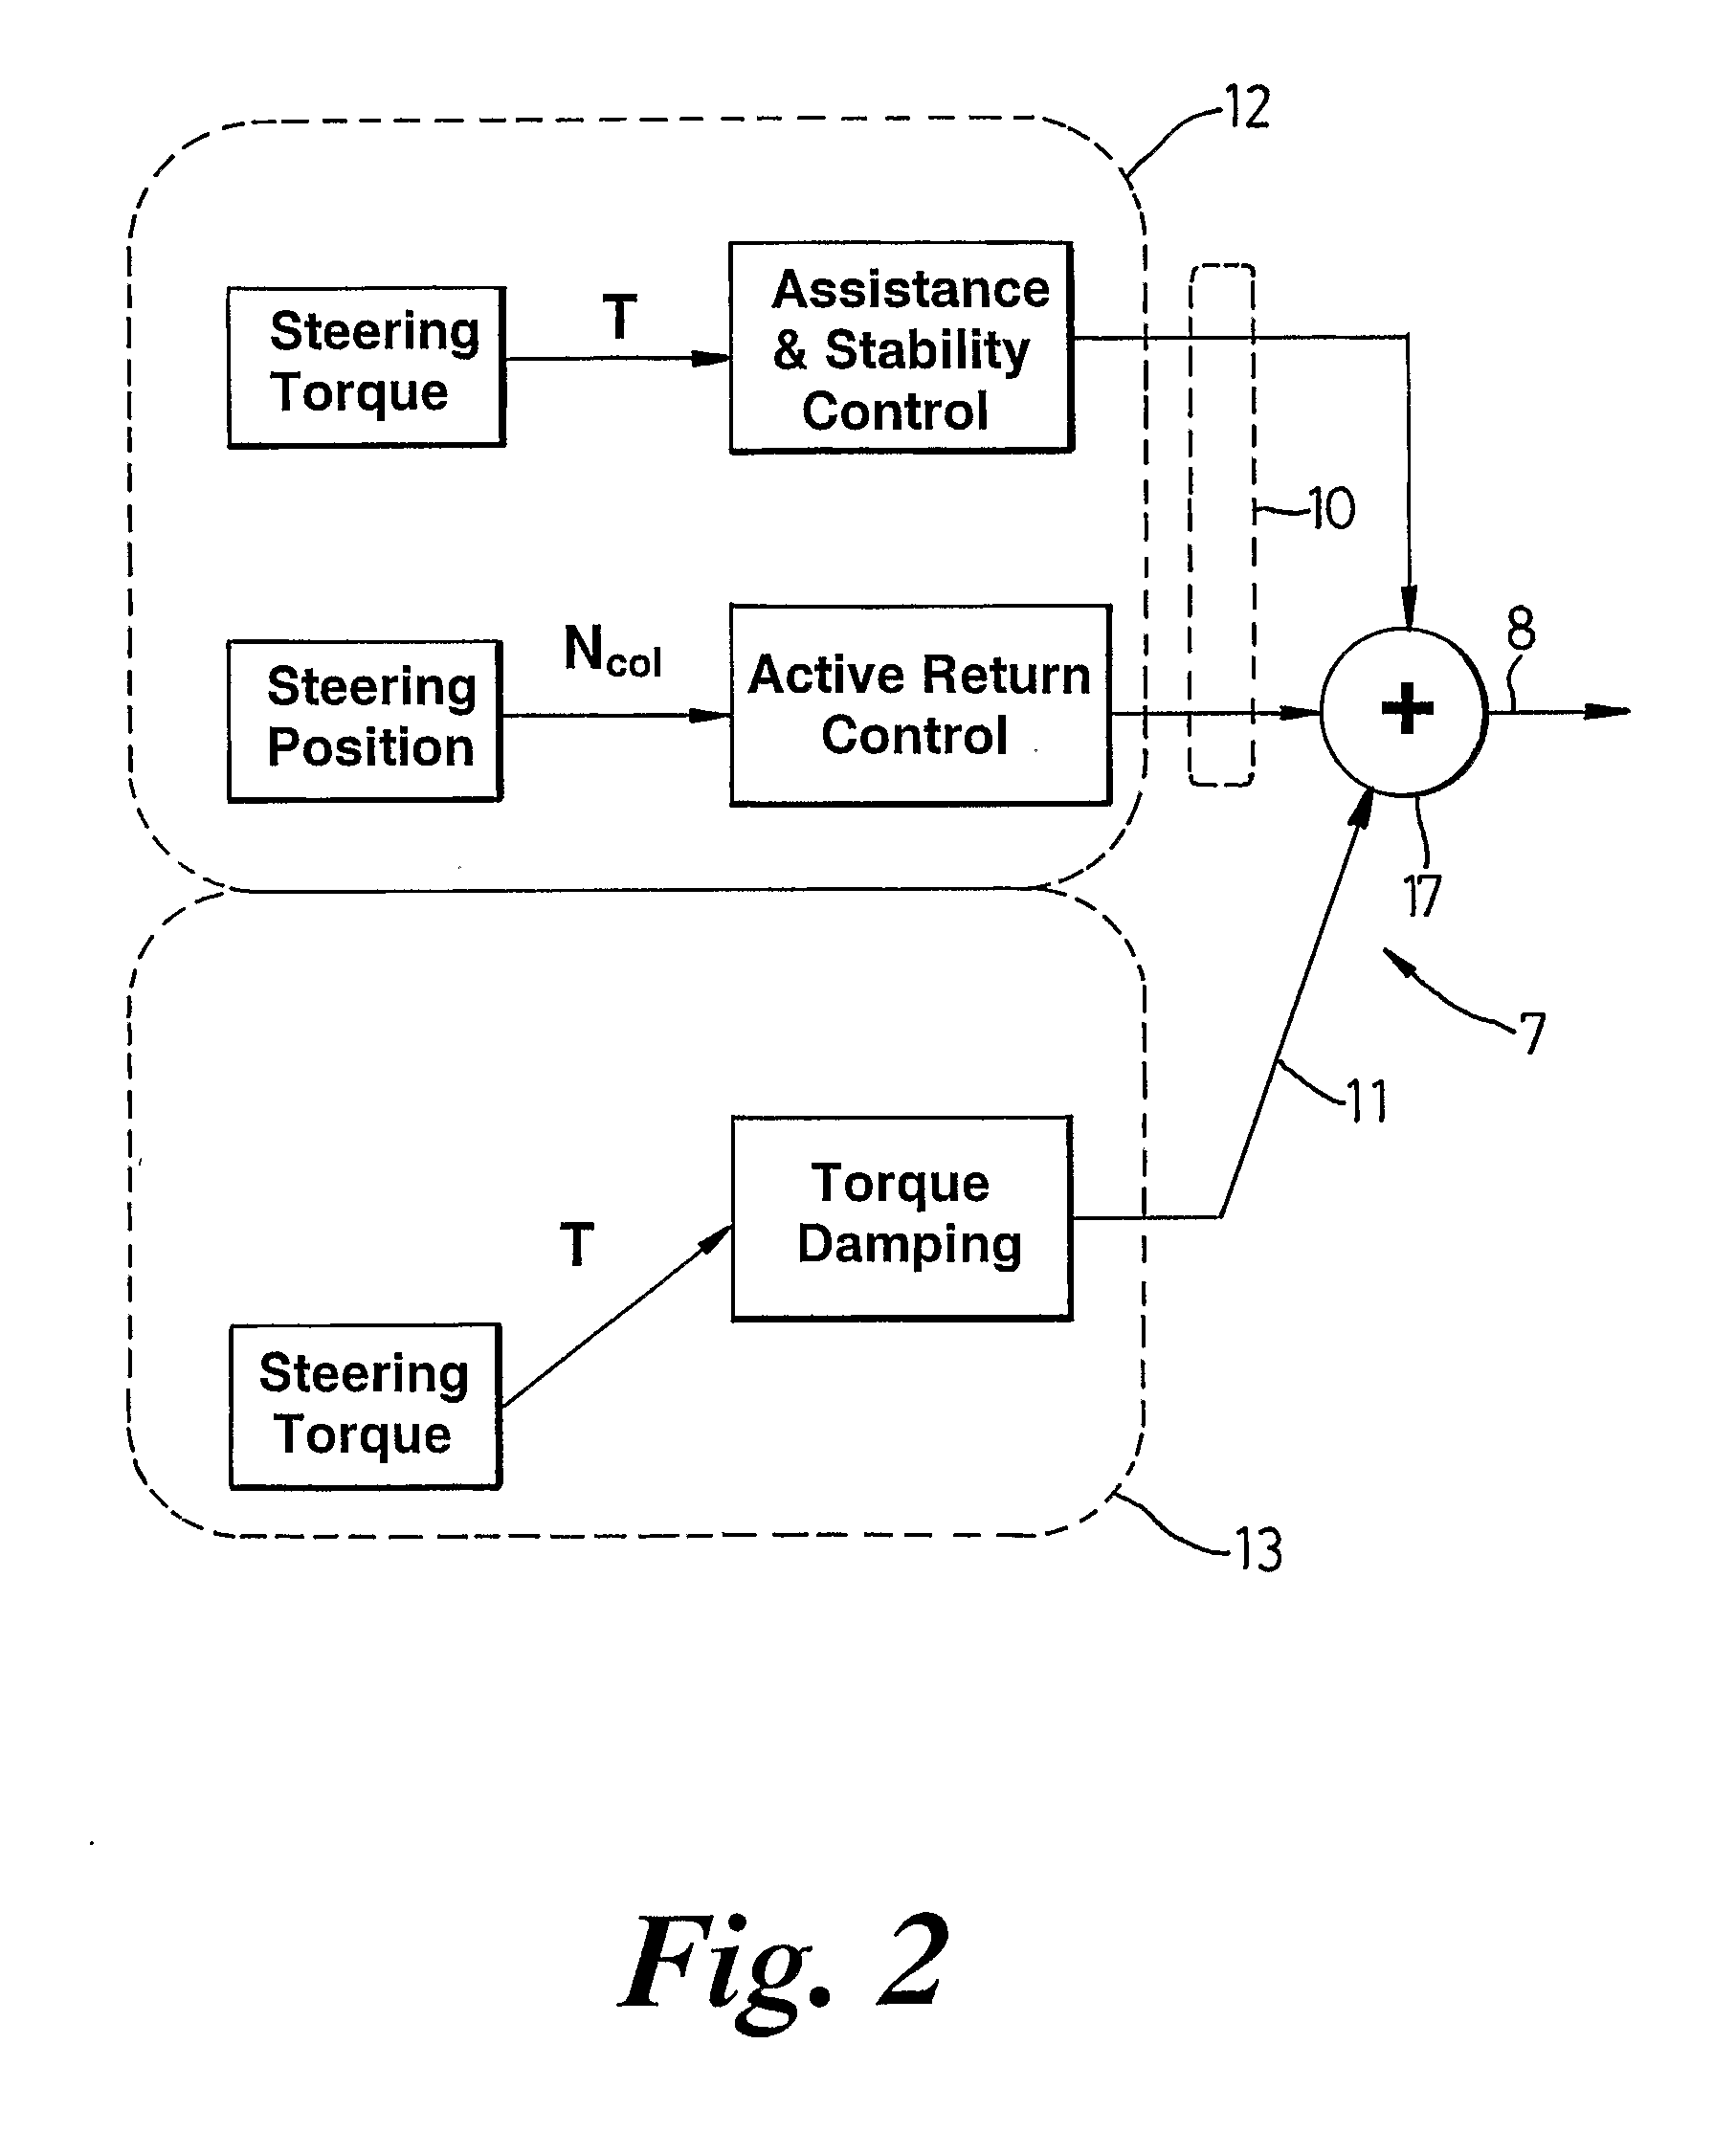 Electrical power assisted steering system